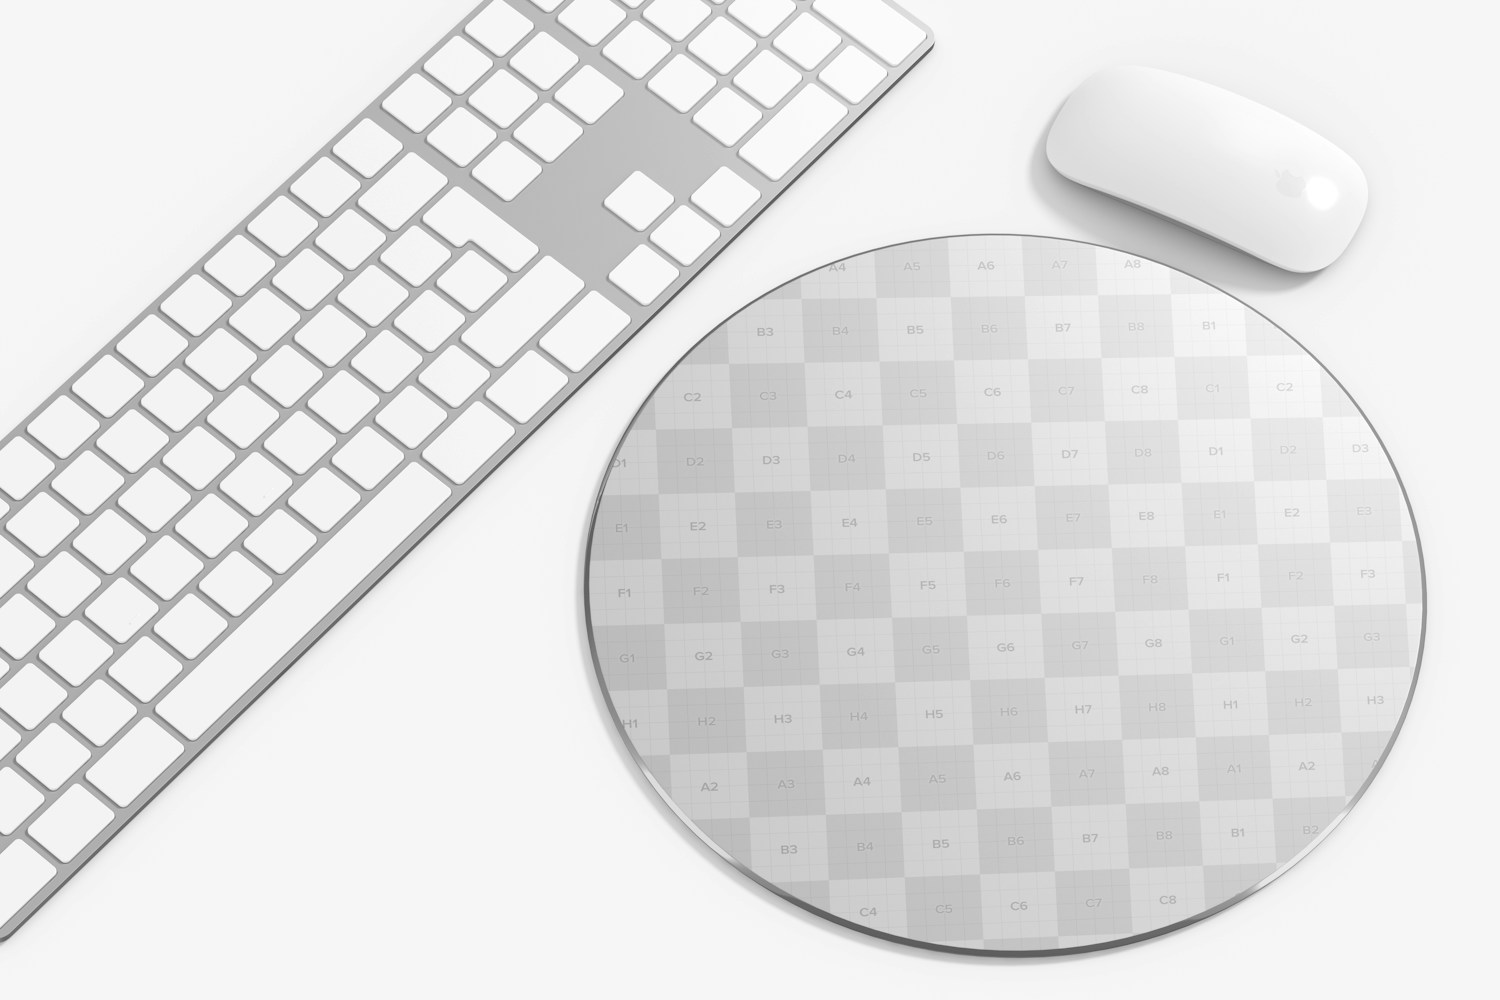 Round Aluminum Mouse Pad with Keyboard Mockup